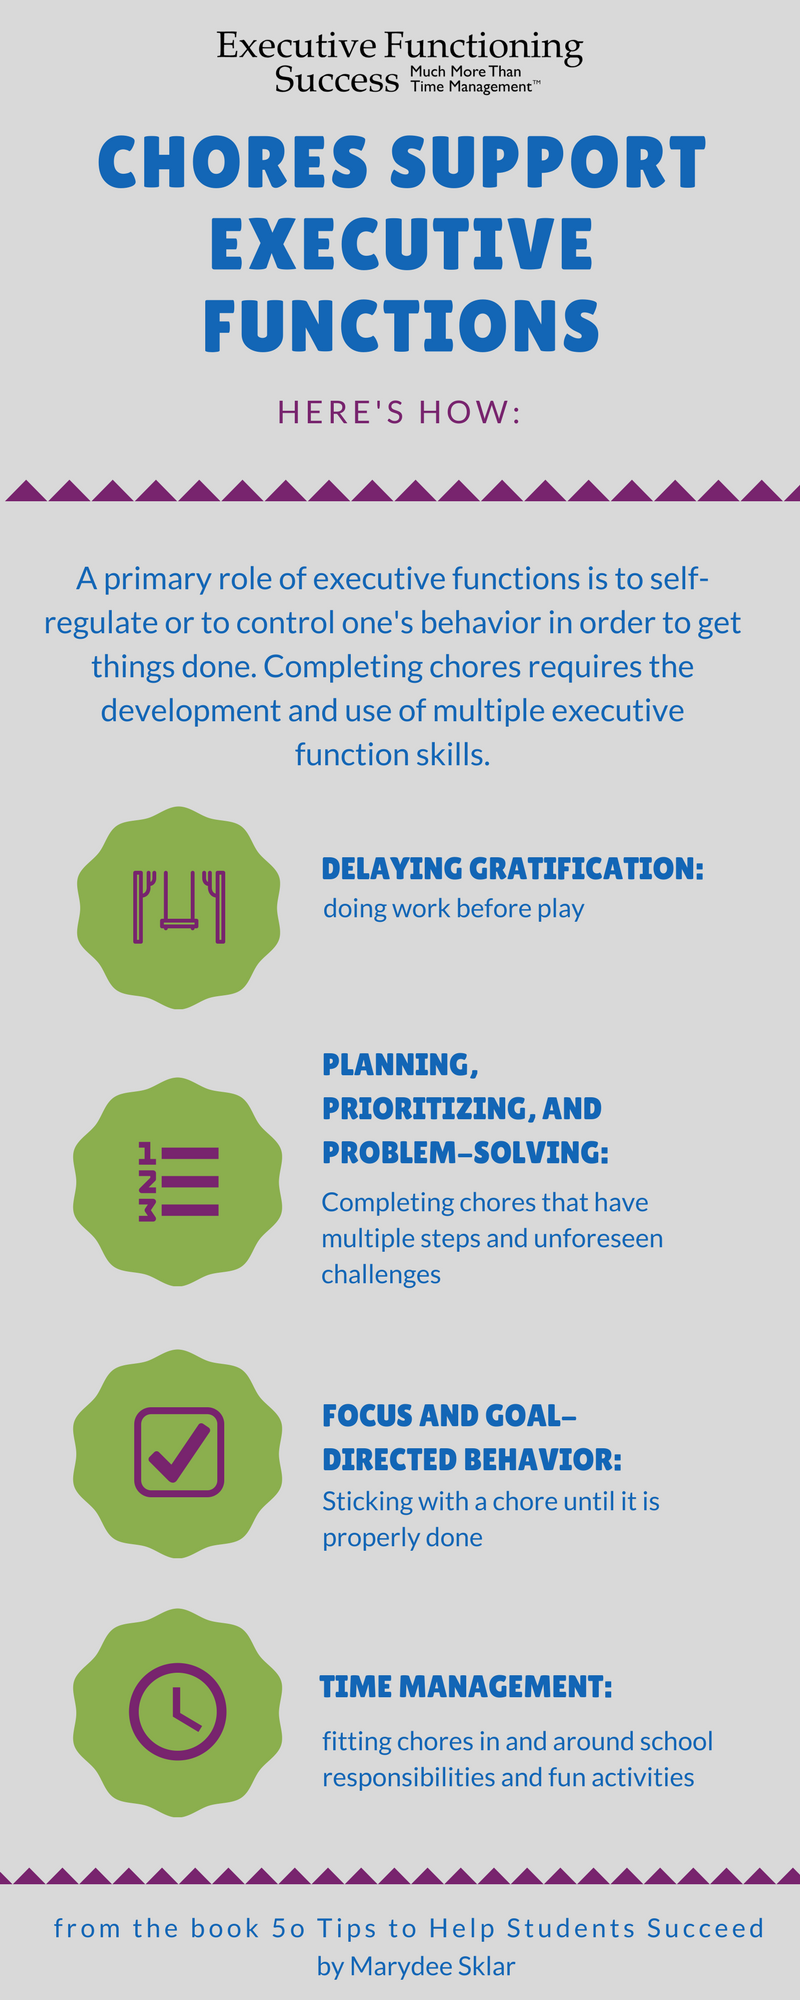 Chores to help develop executive functions